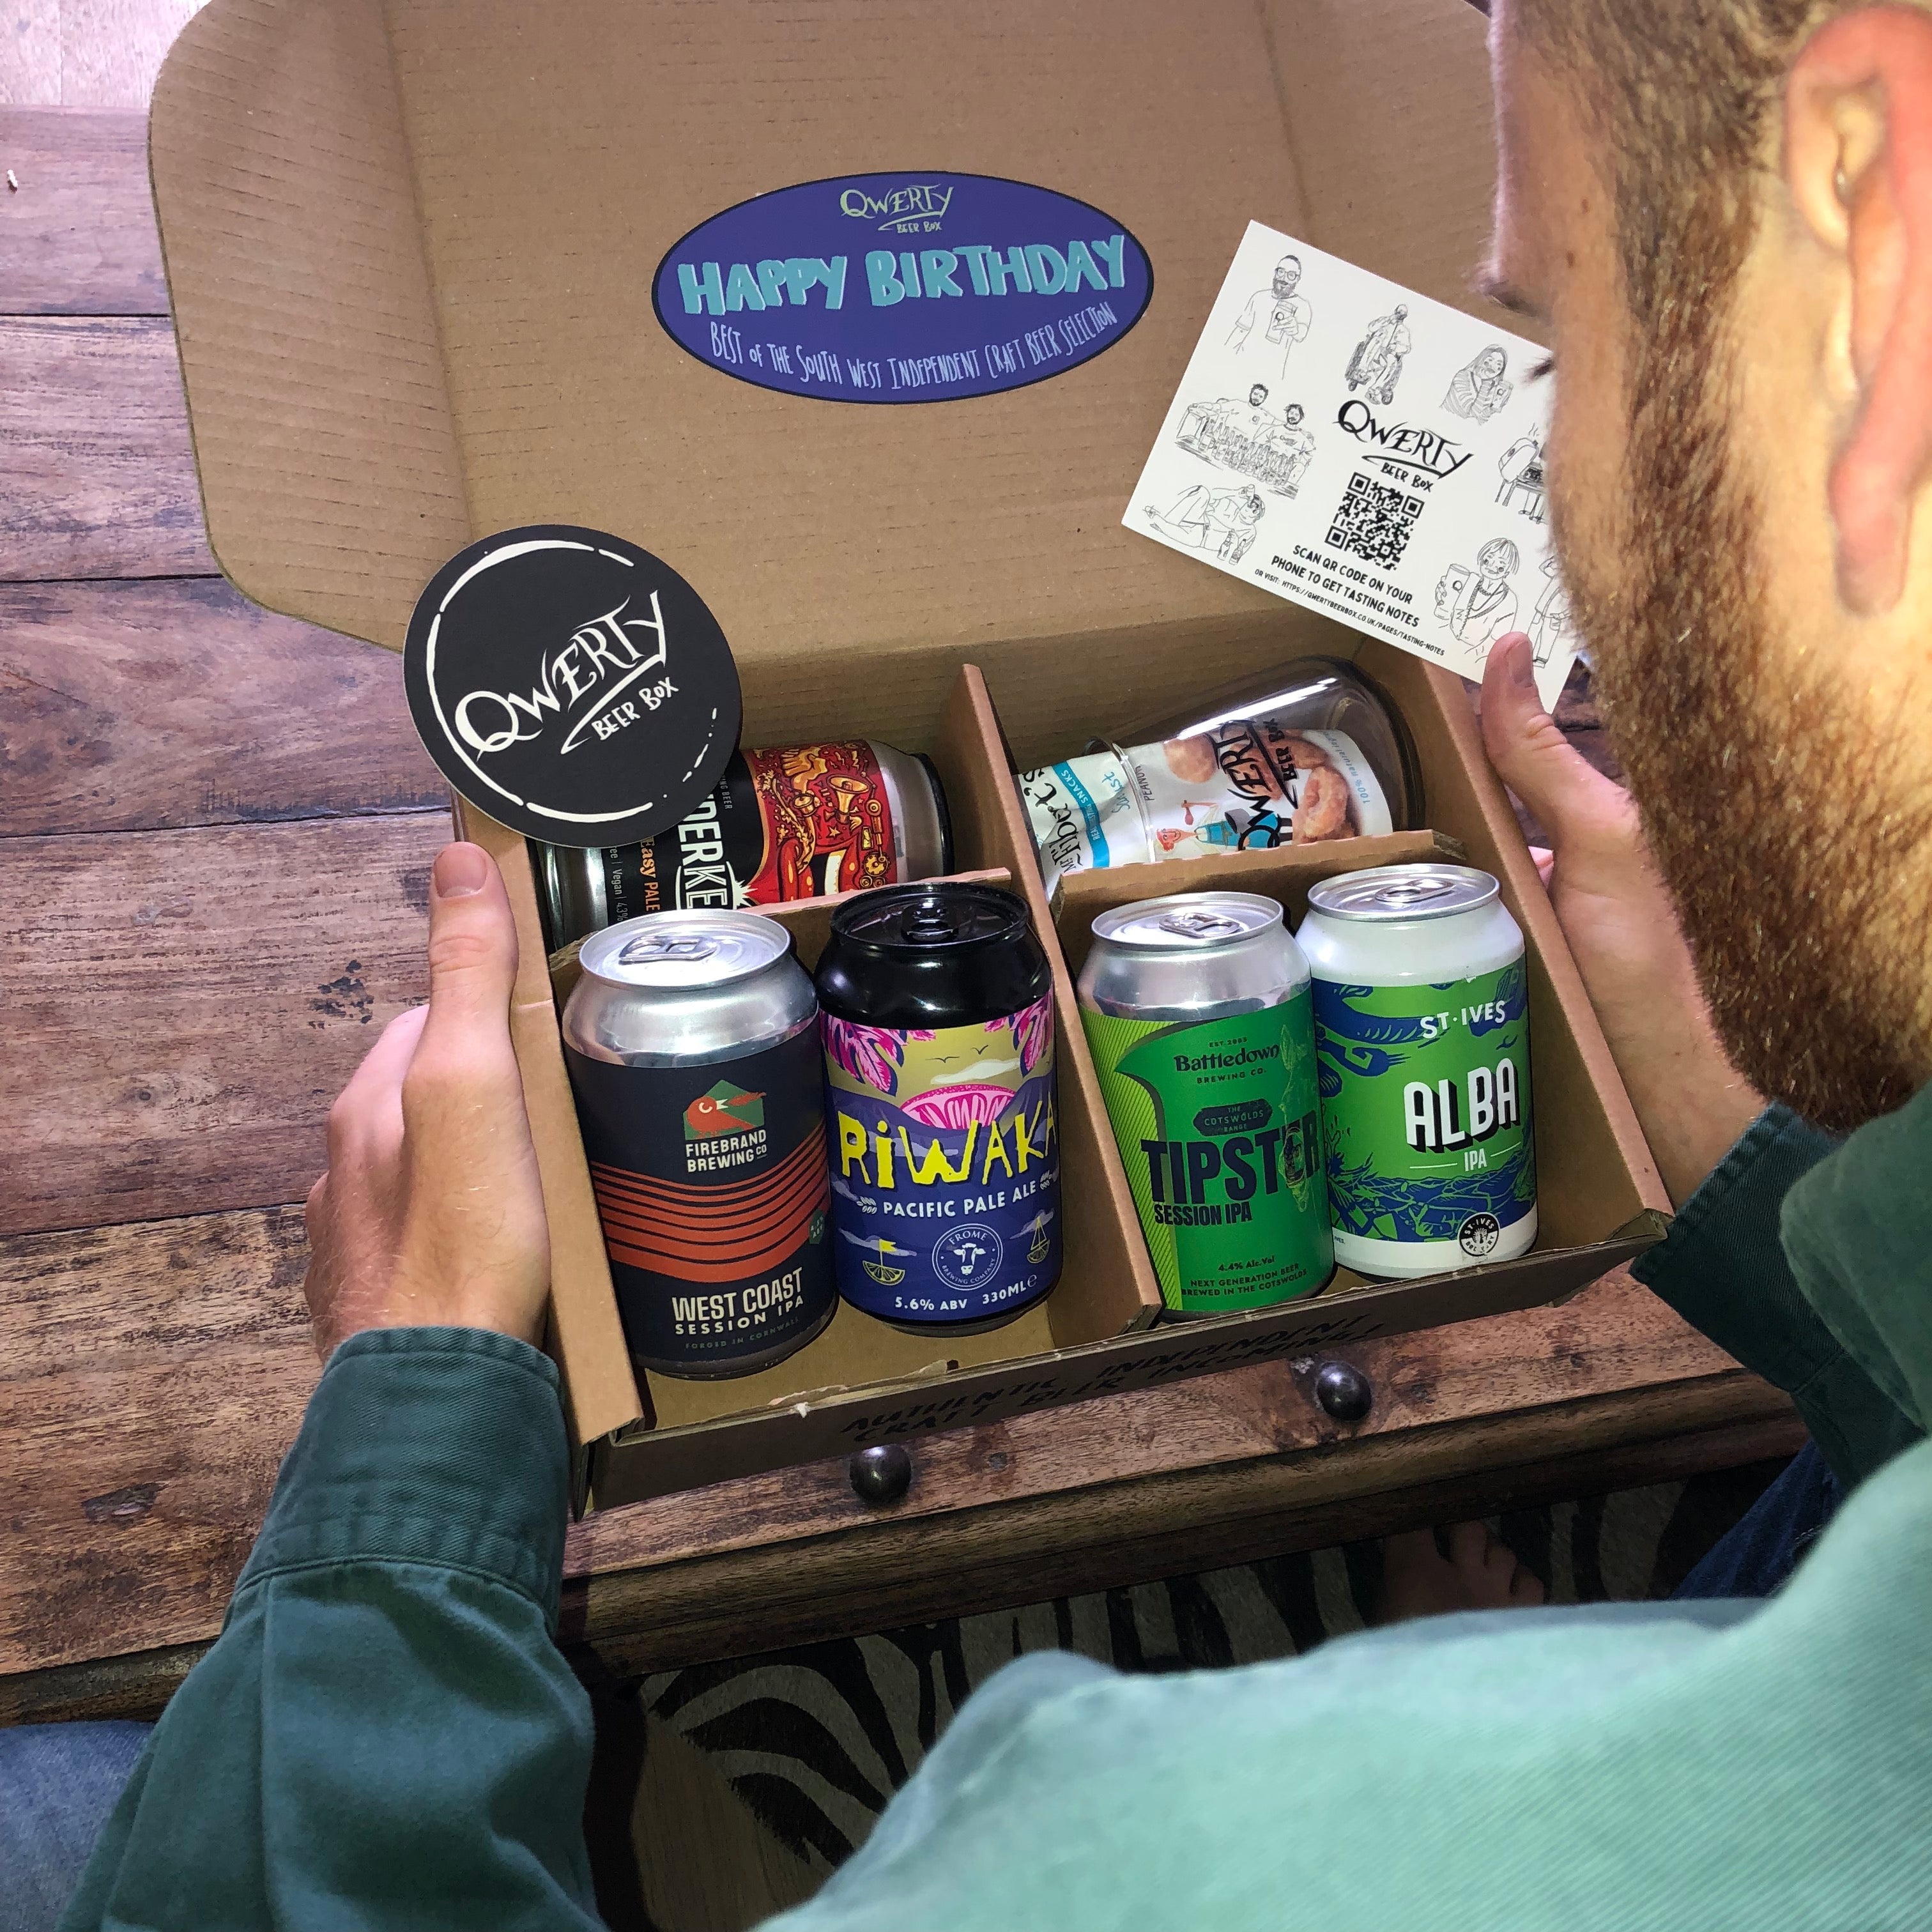 Pale Ale & IPA Father's Day Craft Beer Gift Hamper